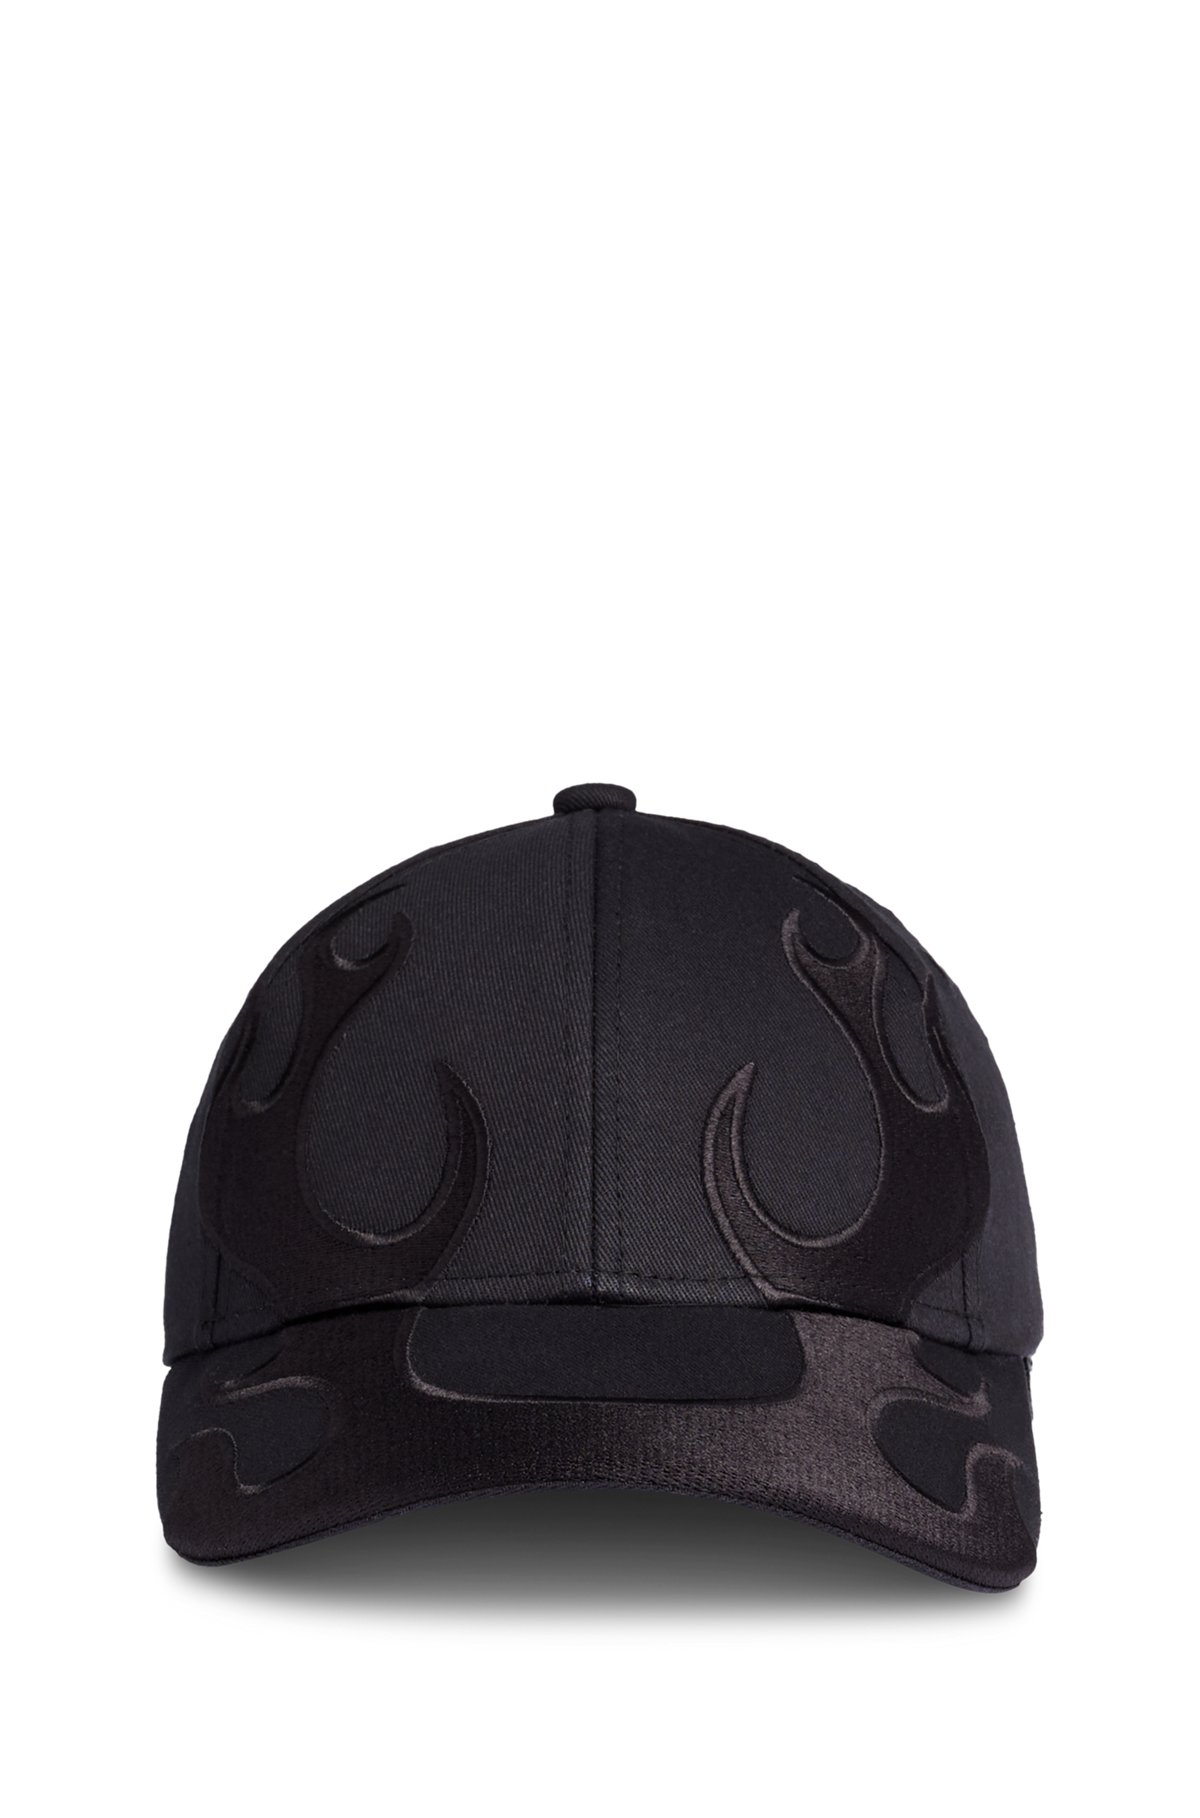 Flame-embroidered cap in cotton twill, Black